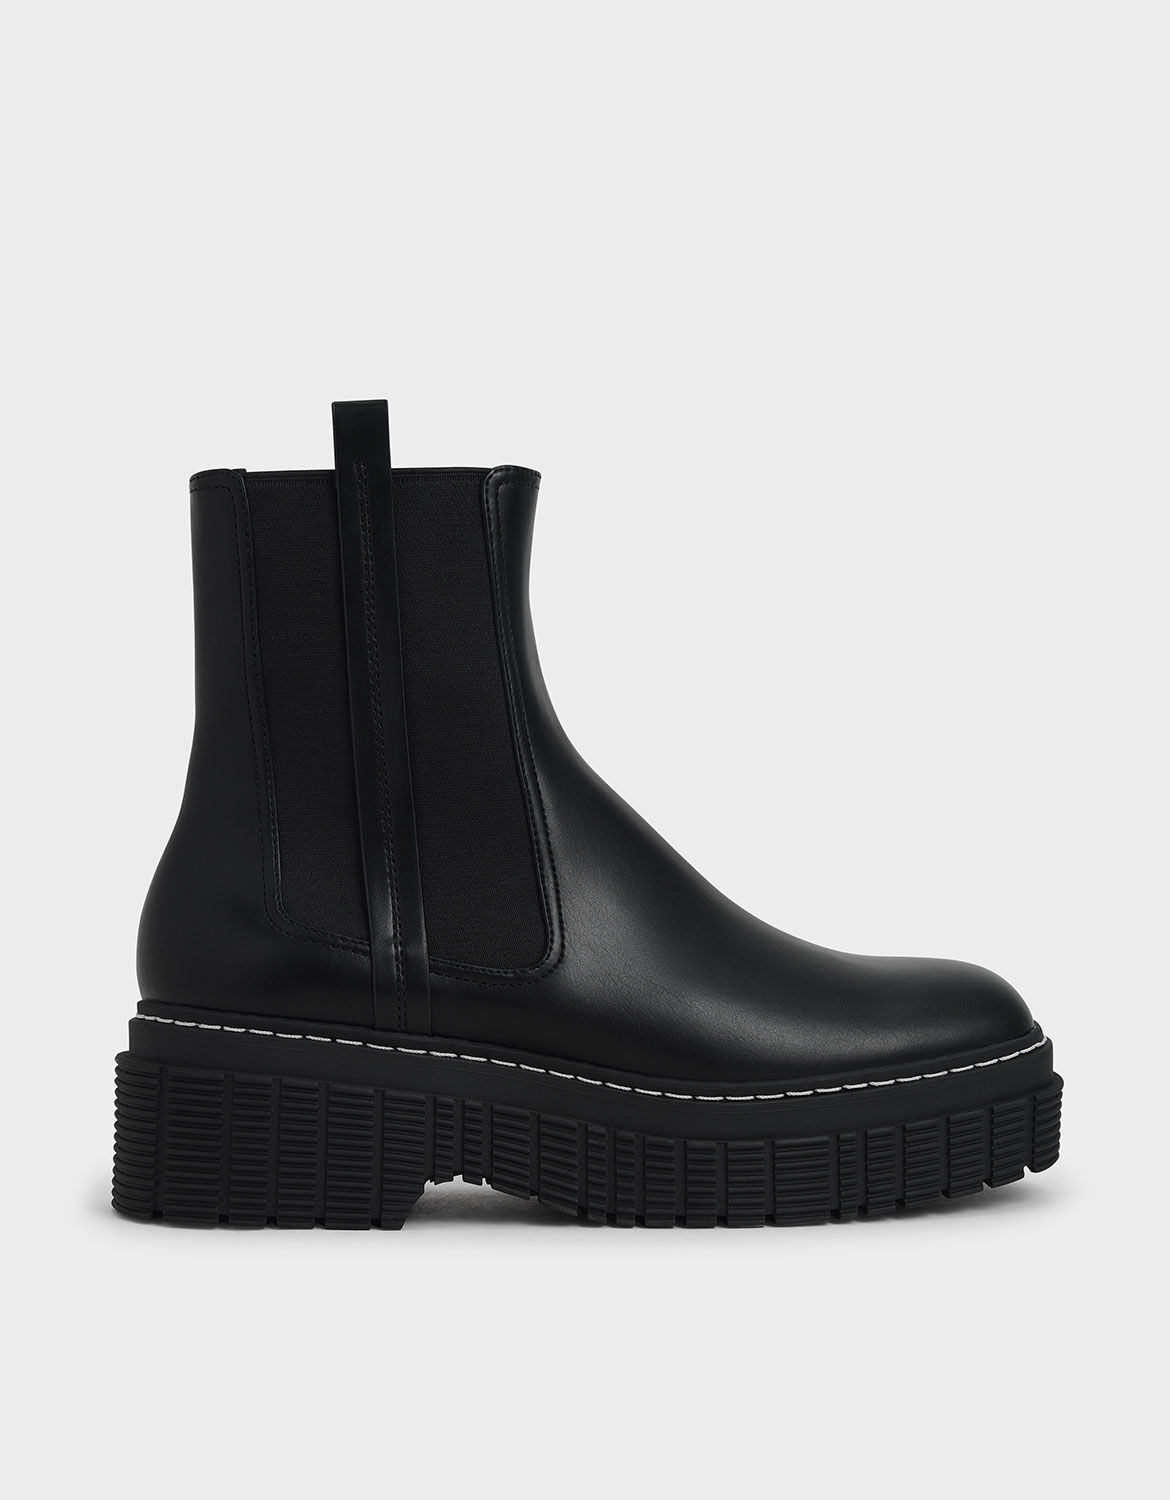 Shop Women's Boots Online - CHARLES & KEITH NL